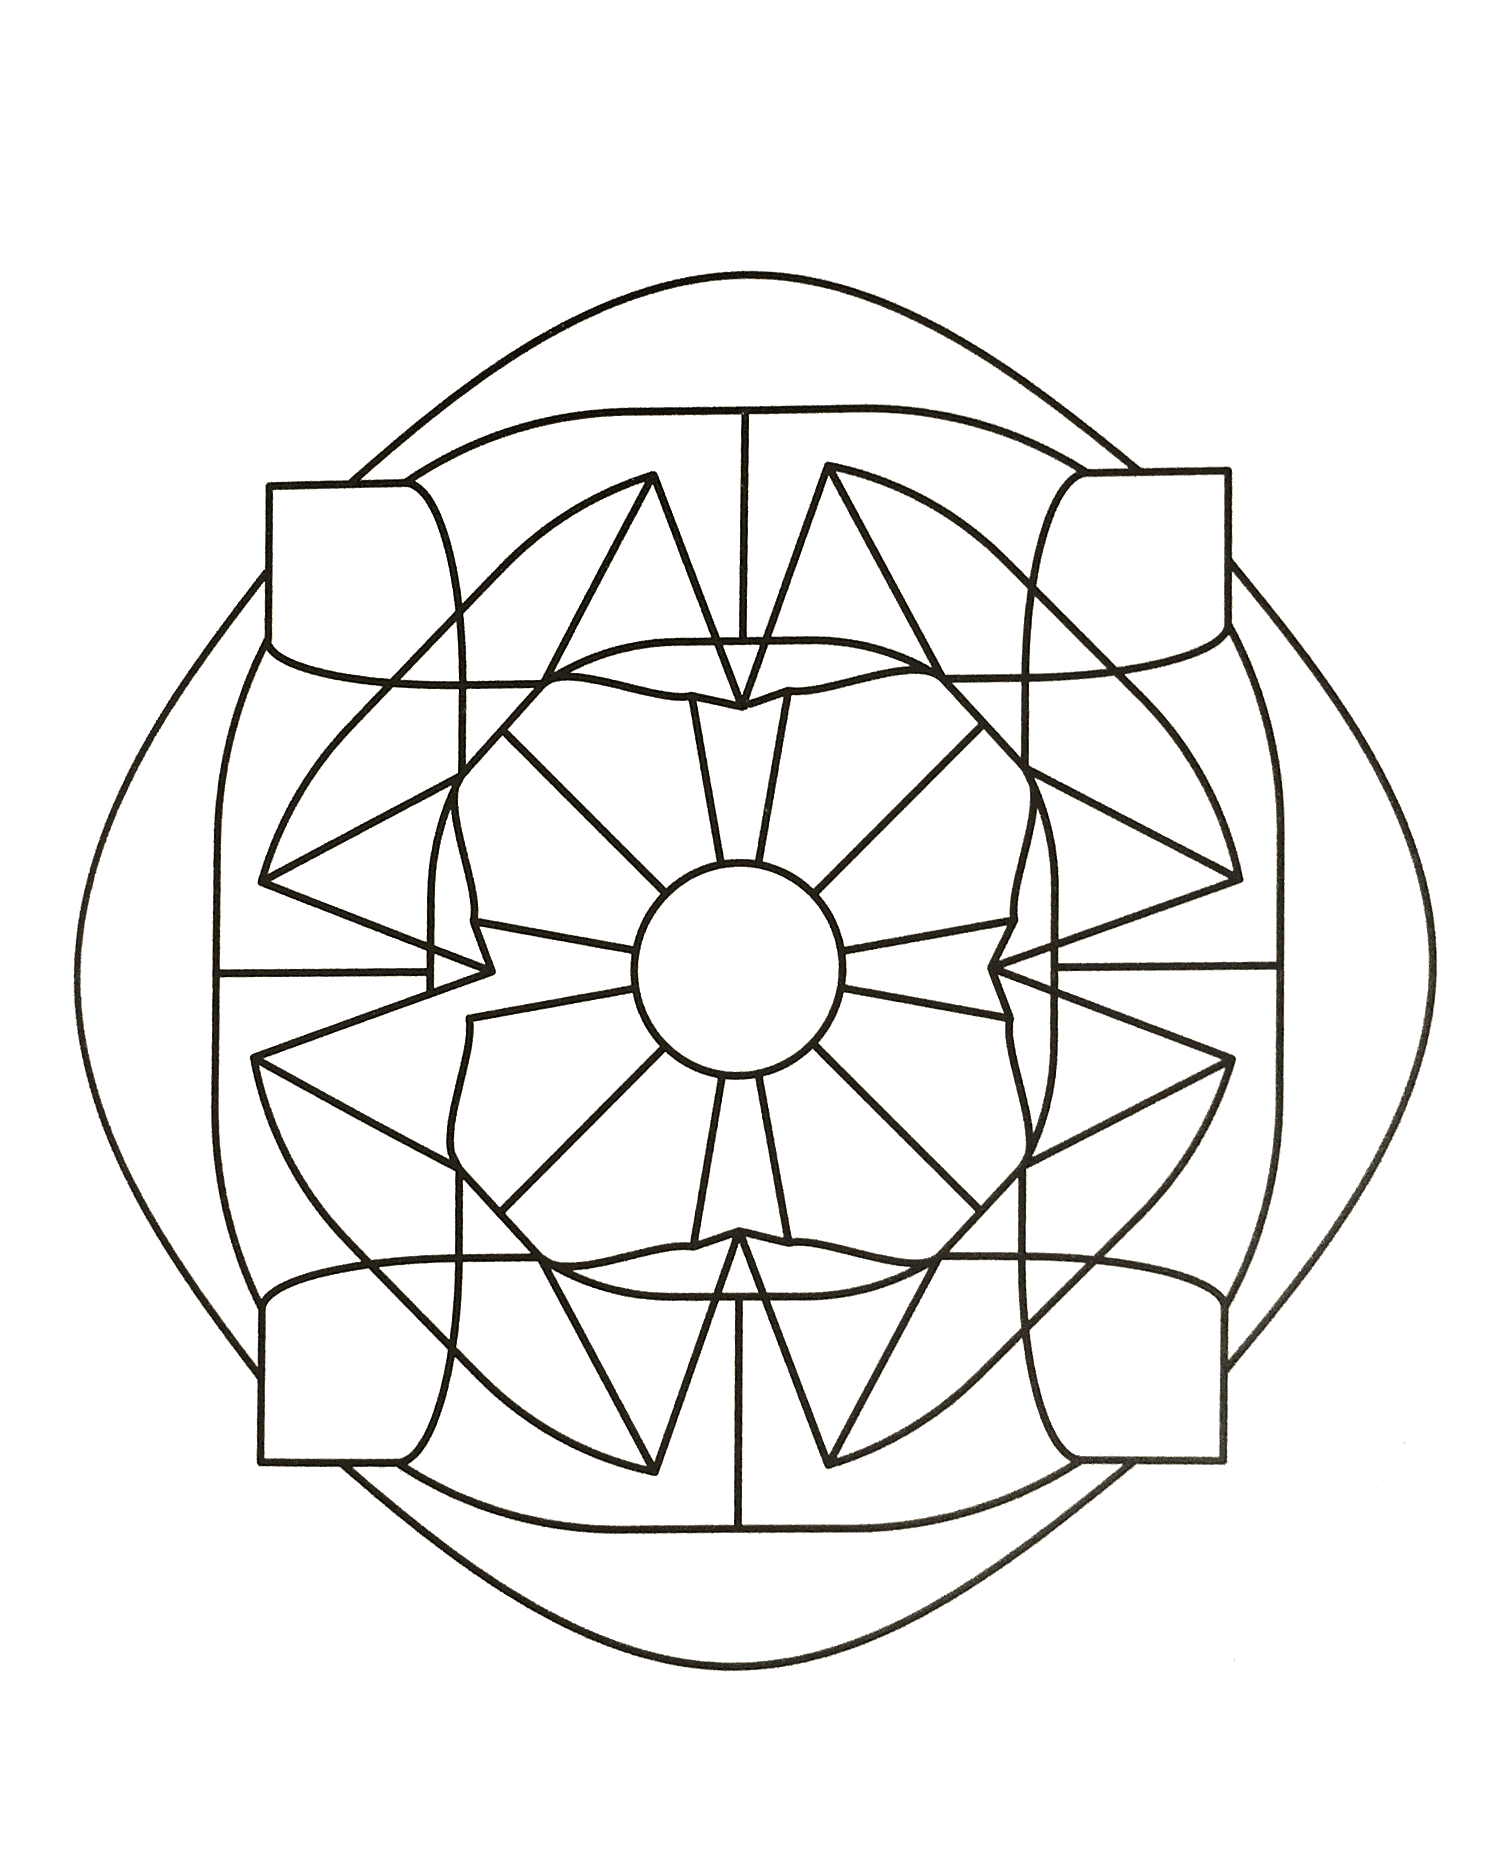 Unique and inspiring Zen & Anti-stress Mandala. Mandalas are designed to help you become free from your worries, because they make it easier to focus on the present moment.